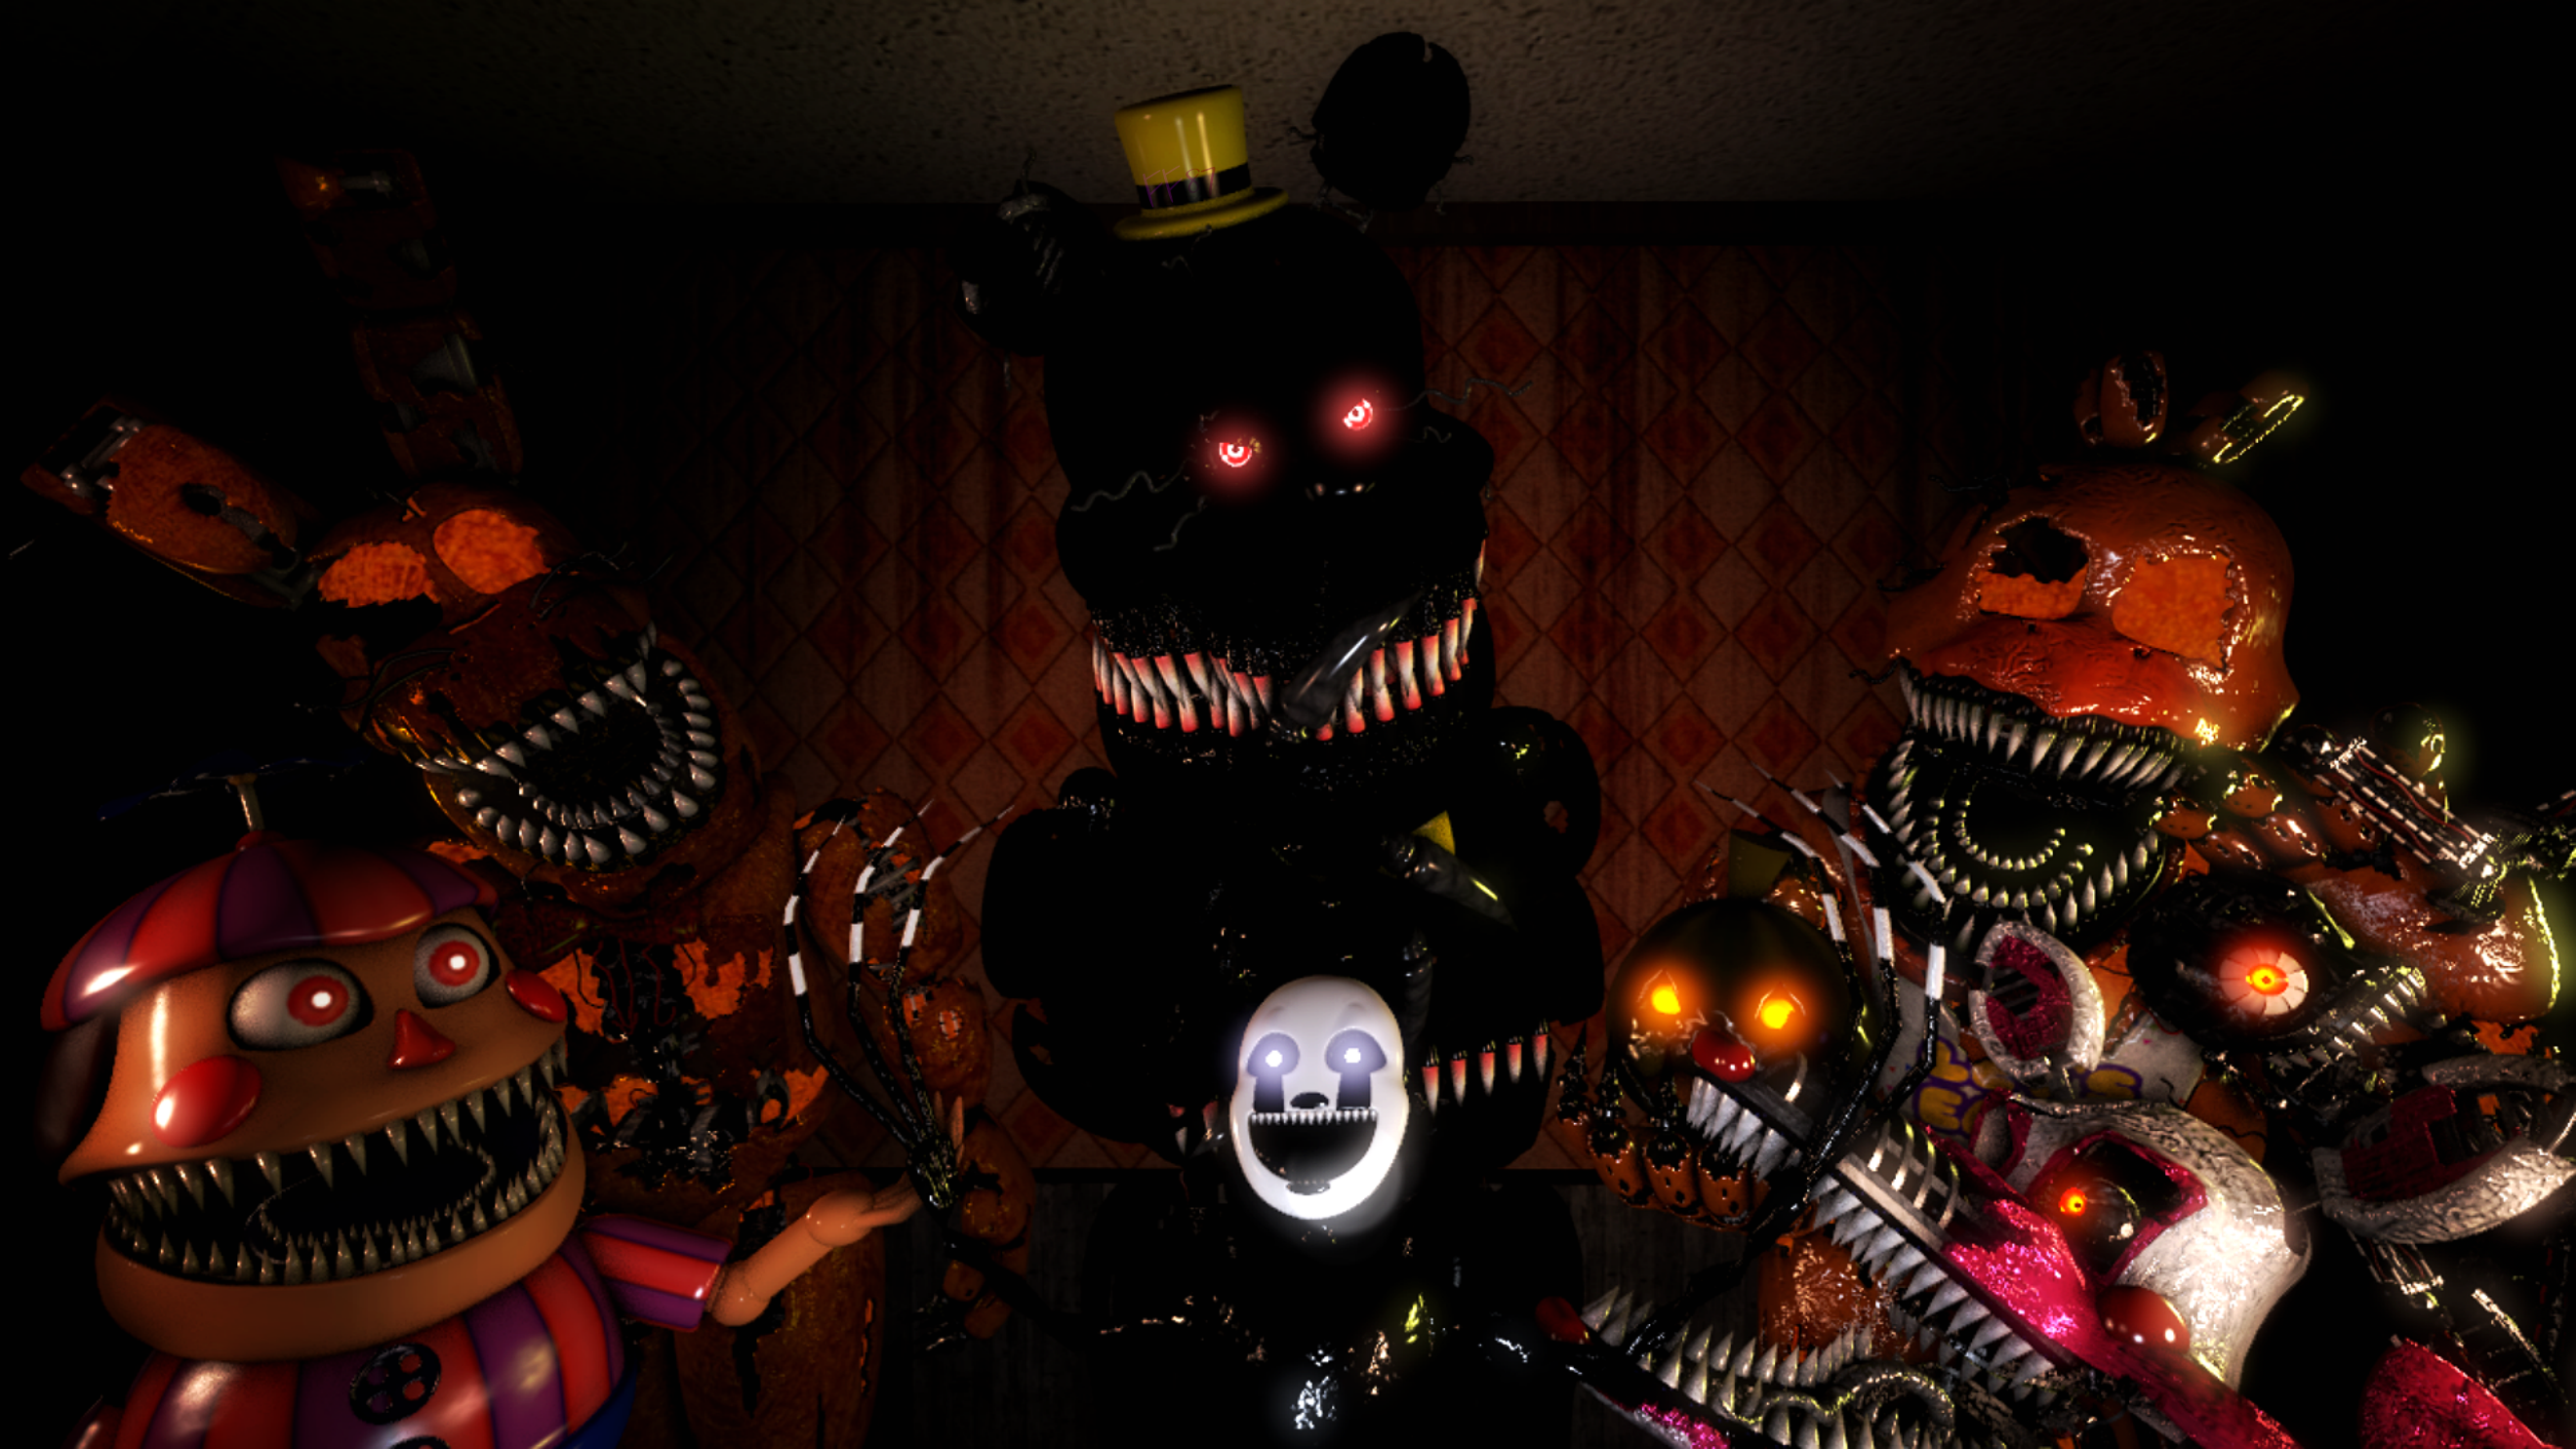 FNAF4-Nightmare Animatronics - Happy Halloween! From us Nightmares! Be sure  to Check out the gameplays of the Halloween Edition for FNAF4! It's  Awesome!!! :D